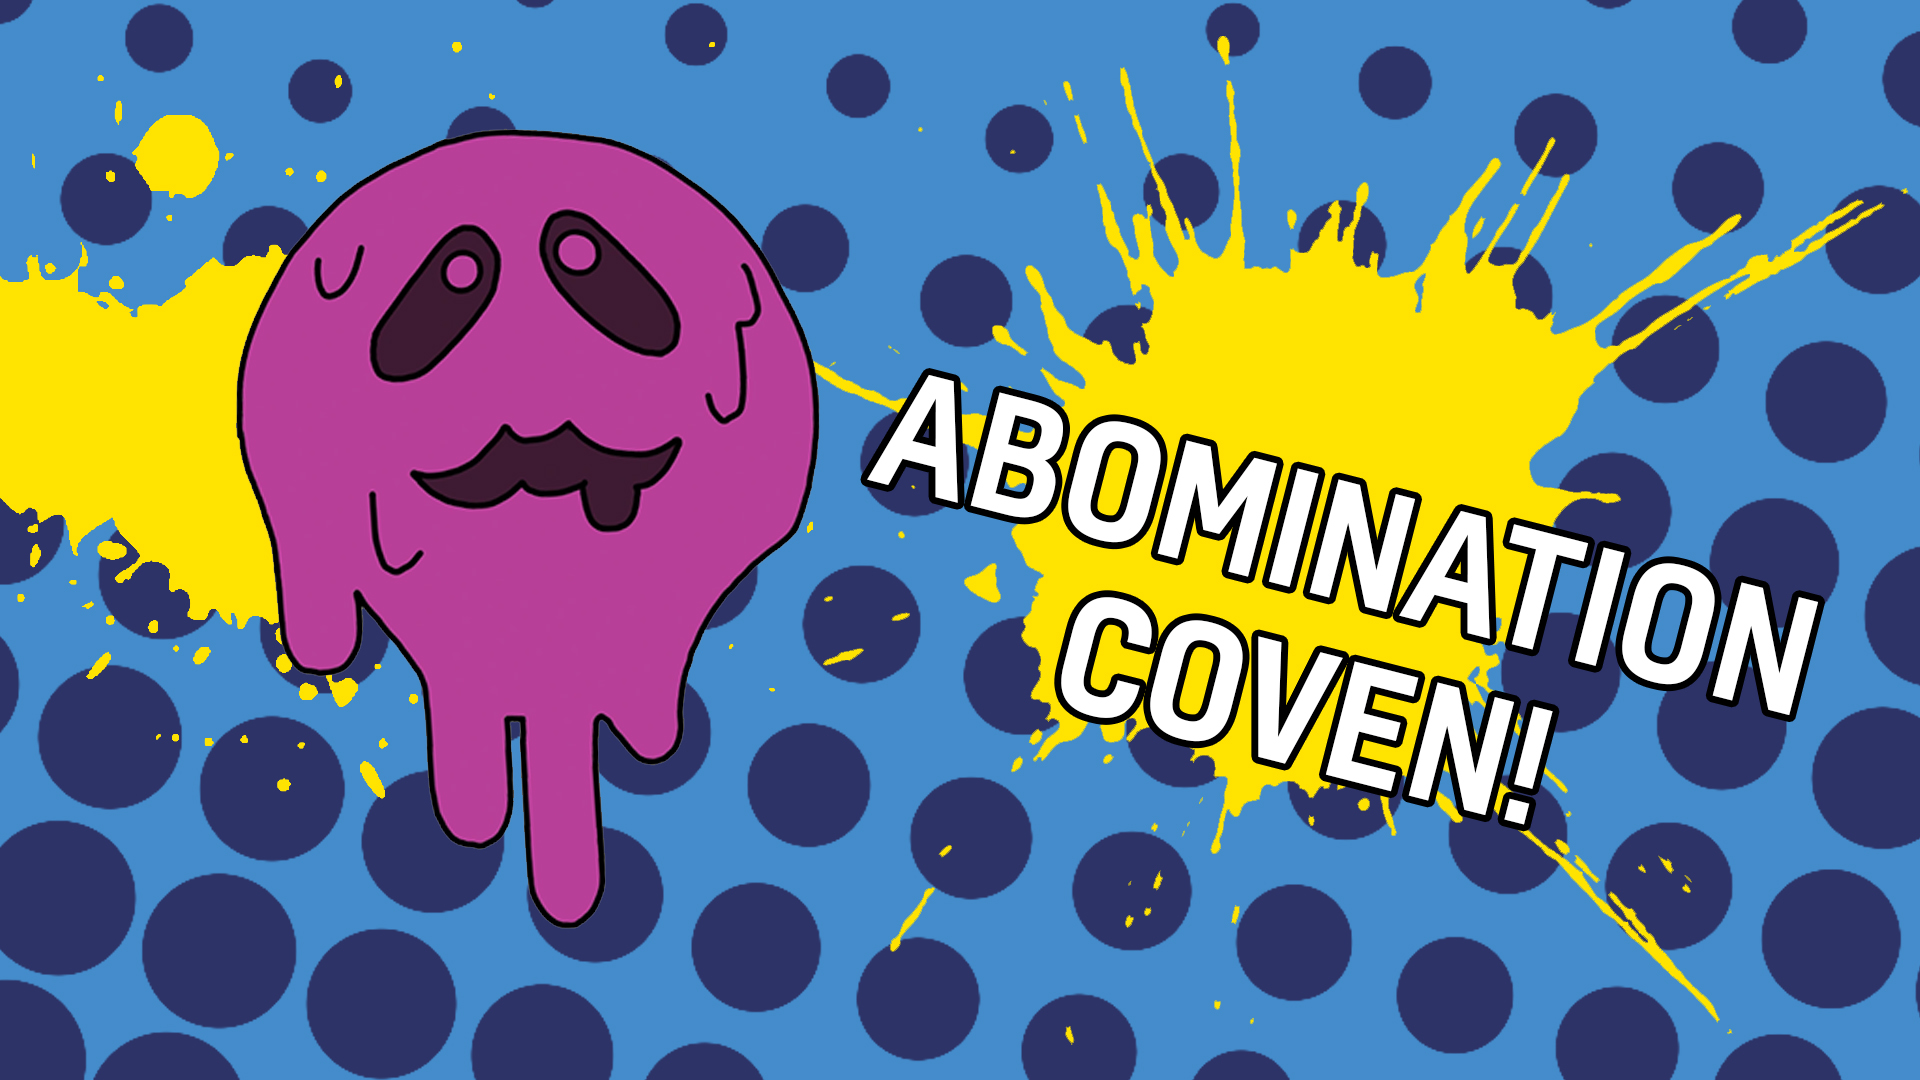 Result: Abomination Coven!